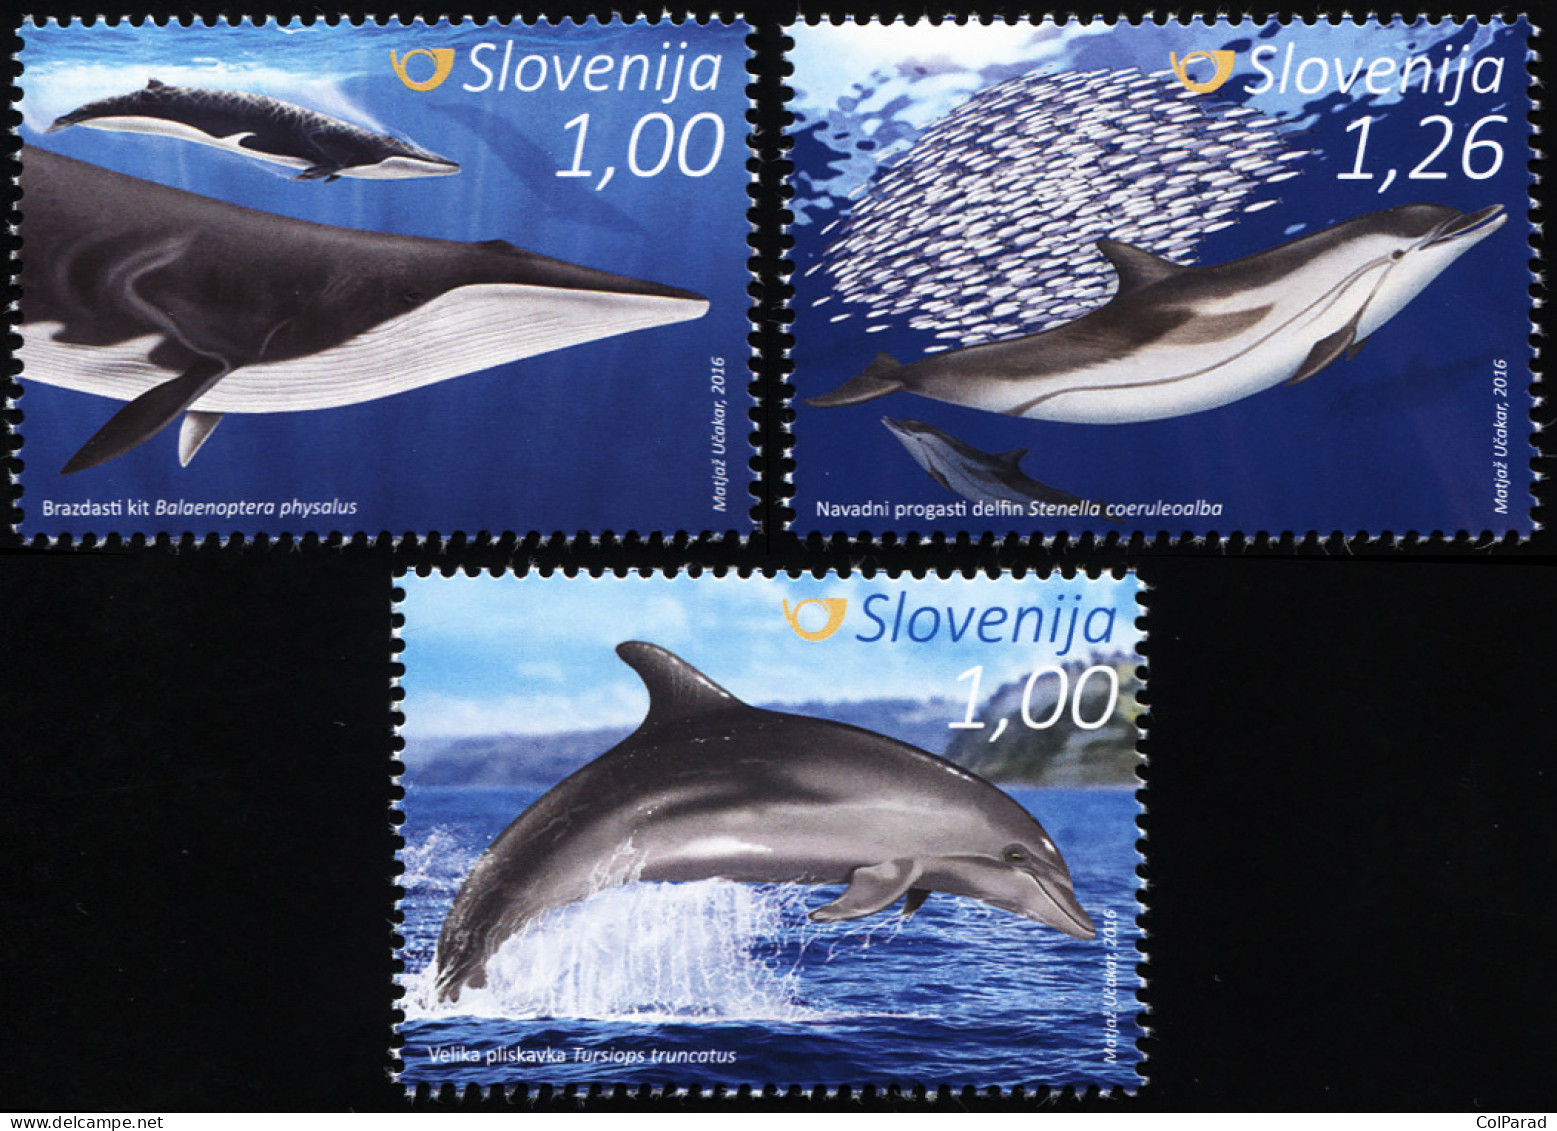 SLOVENIA - 2016 - SET OF 3 STAMPS MNH ** - Dolphins And Whales - Eslovenia